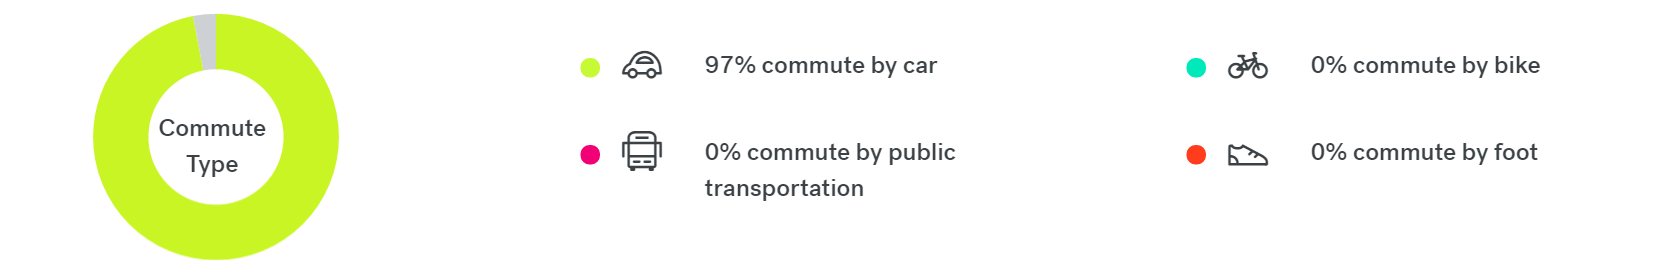 fort myers commute percentage chart